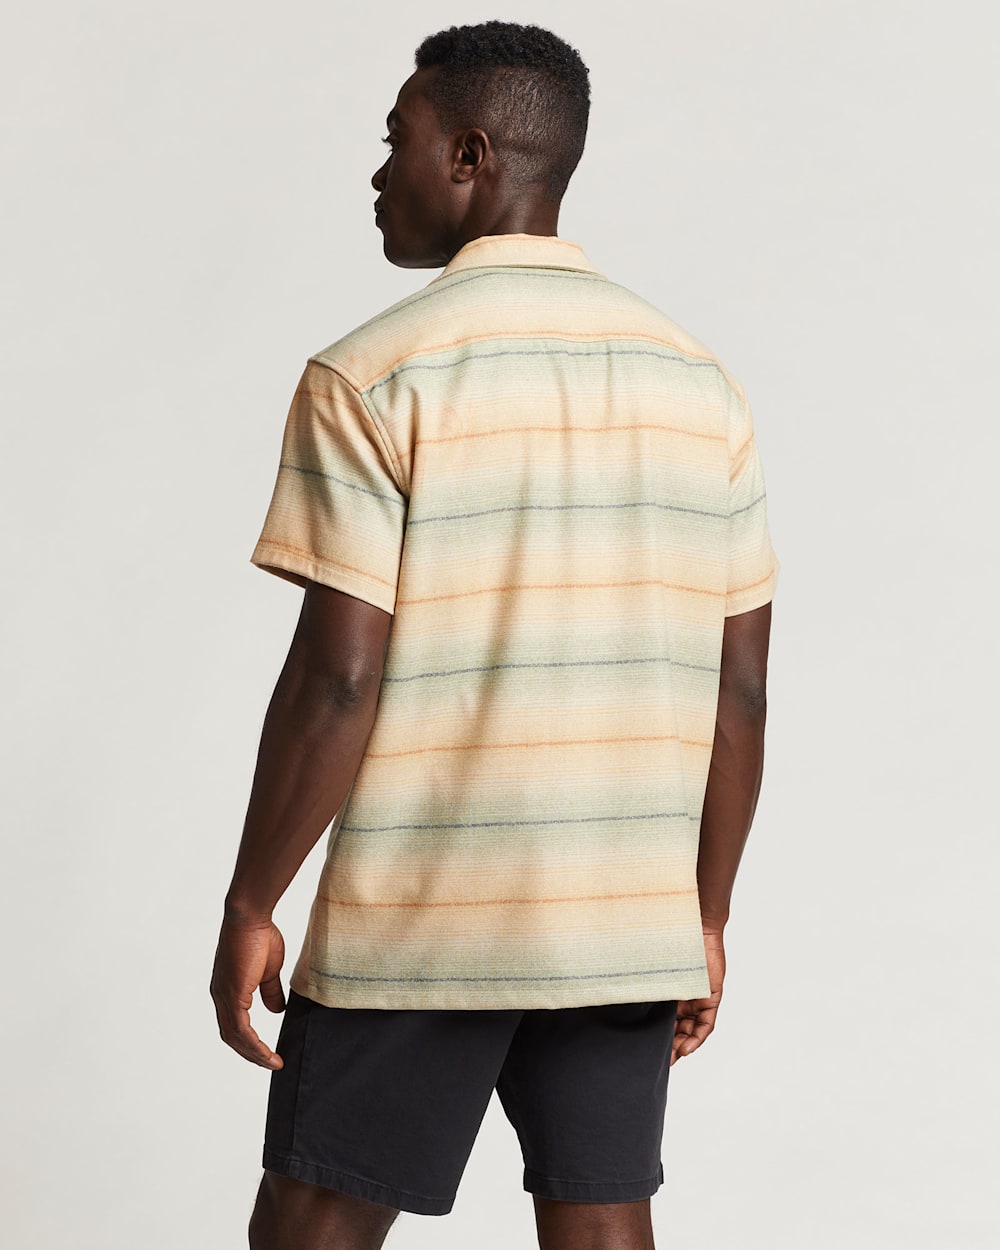 ALTERNATE VIEW OF MEN'S STRIPED SHORT-SLEEVE BOARD SHIRT IN TAN/GREEN OMBRE STRIPE image number 3